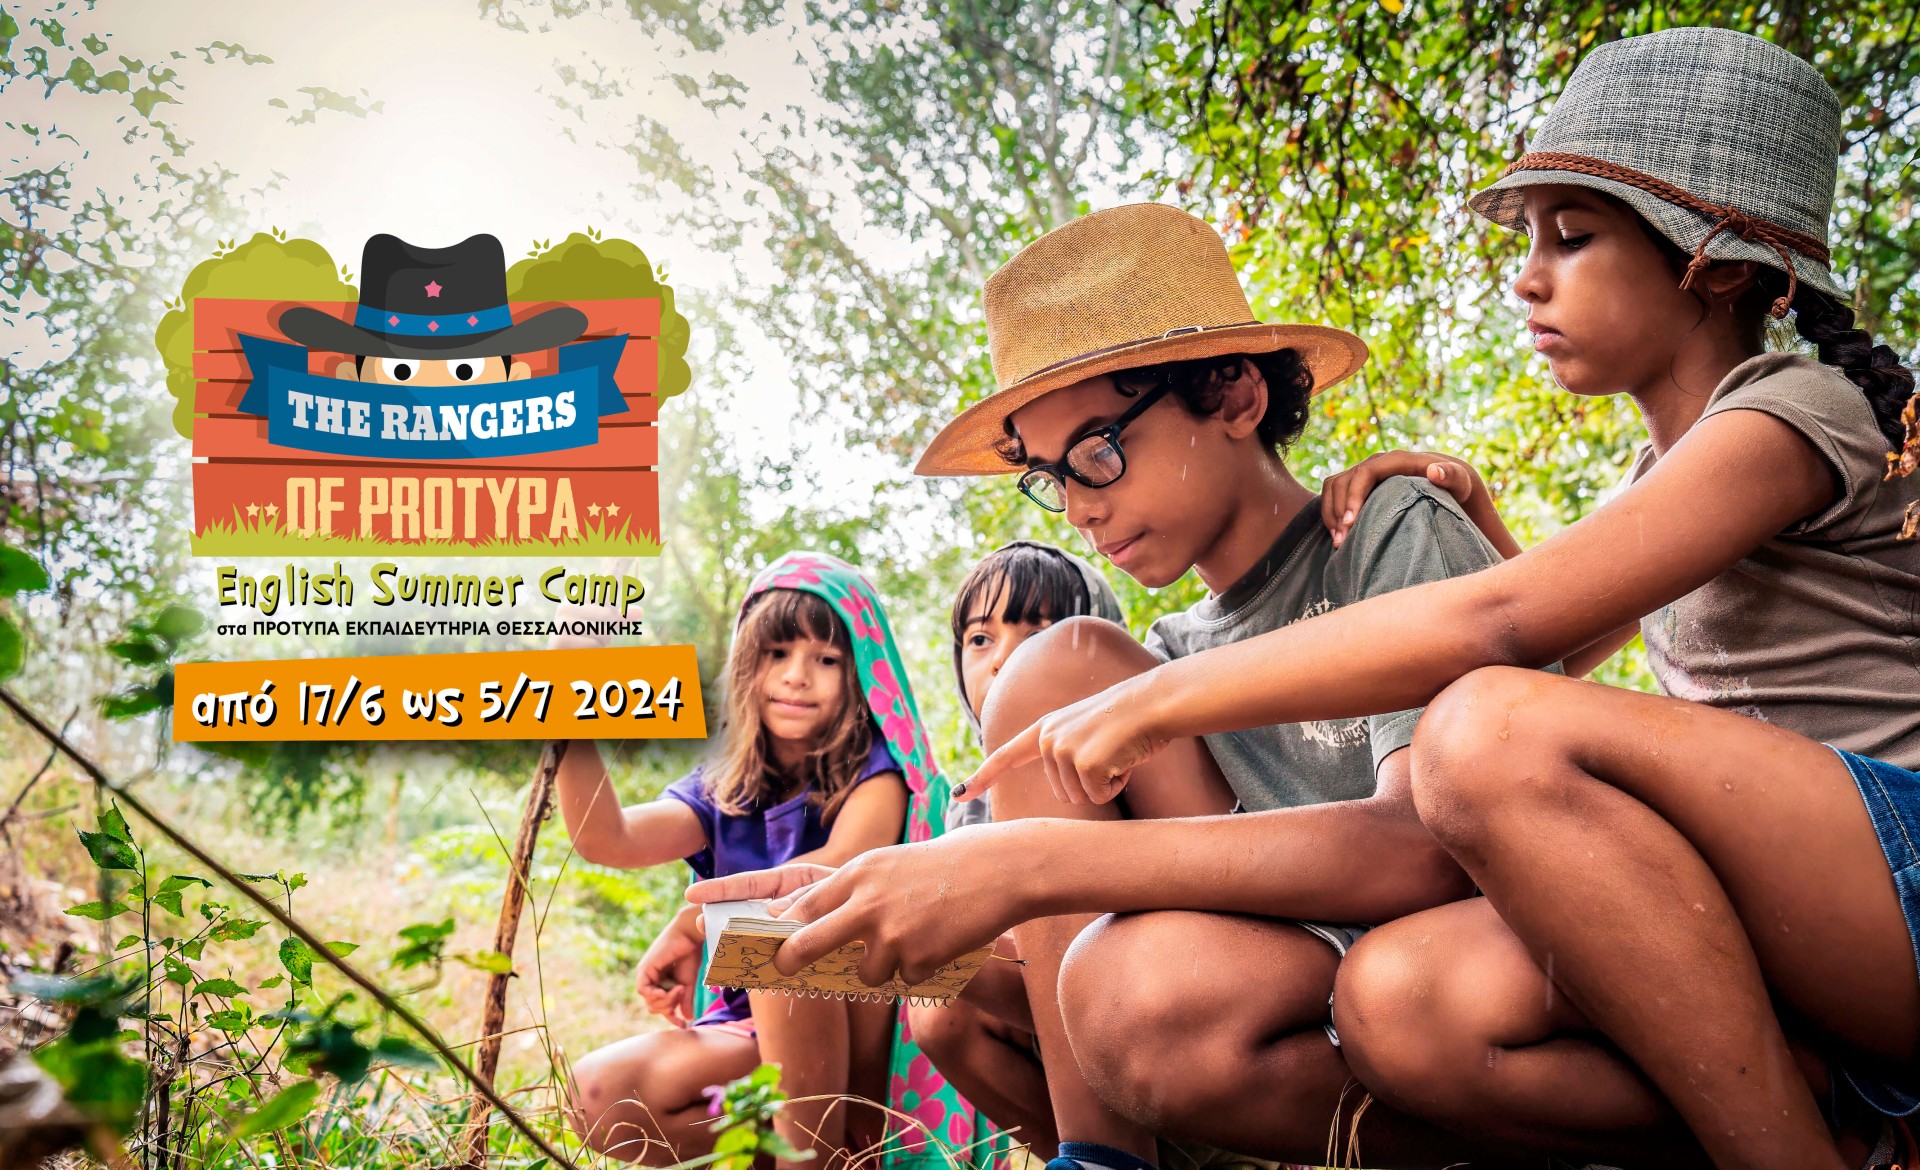 English Summer Camp 2024: ﻿«The Rangers of Protypa»